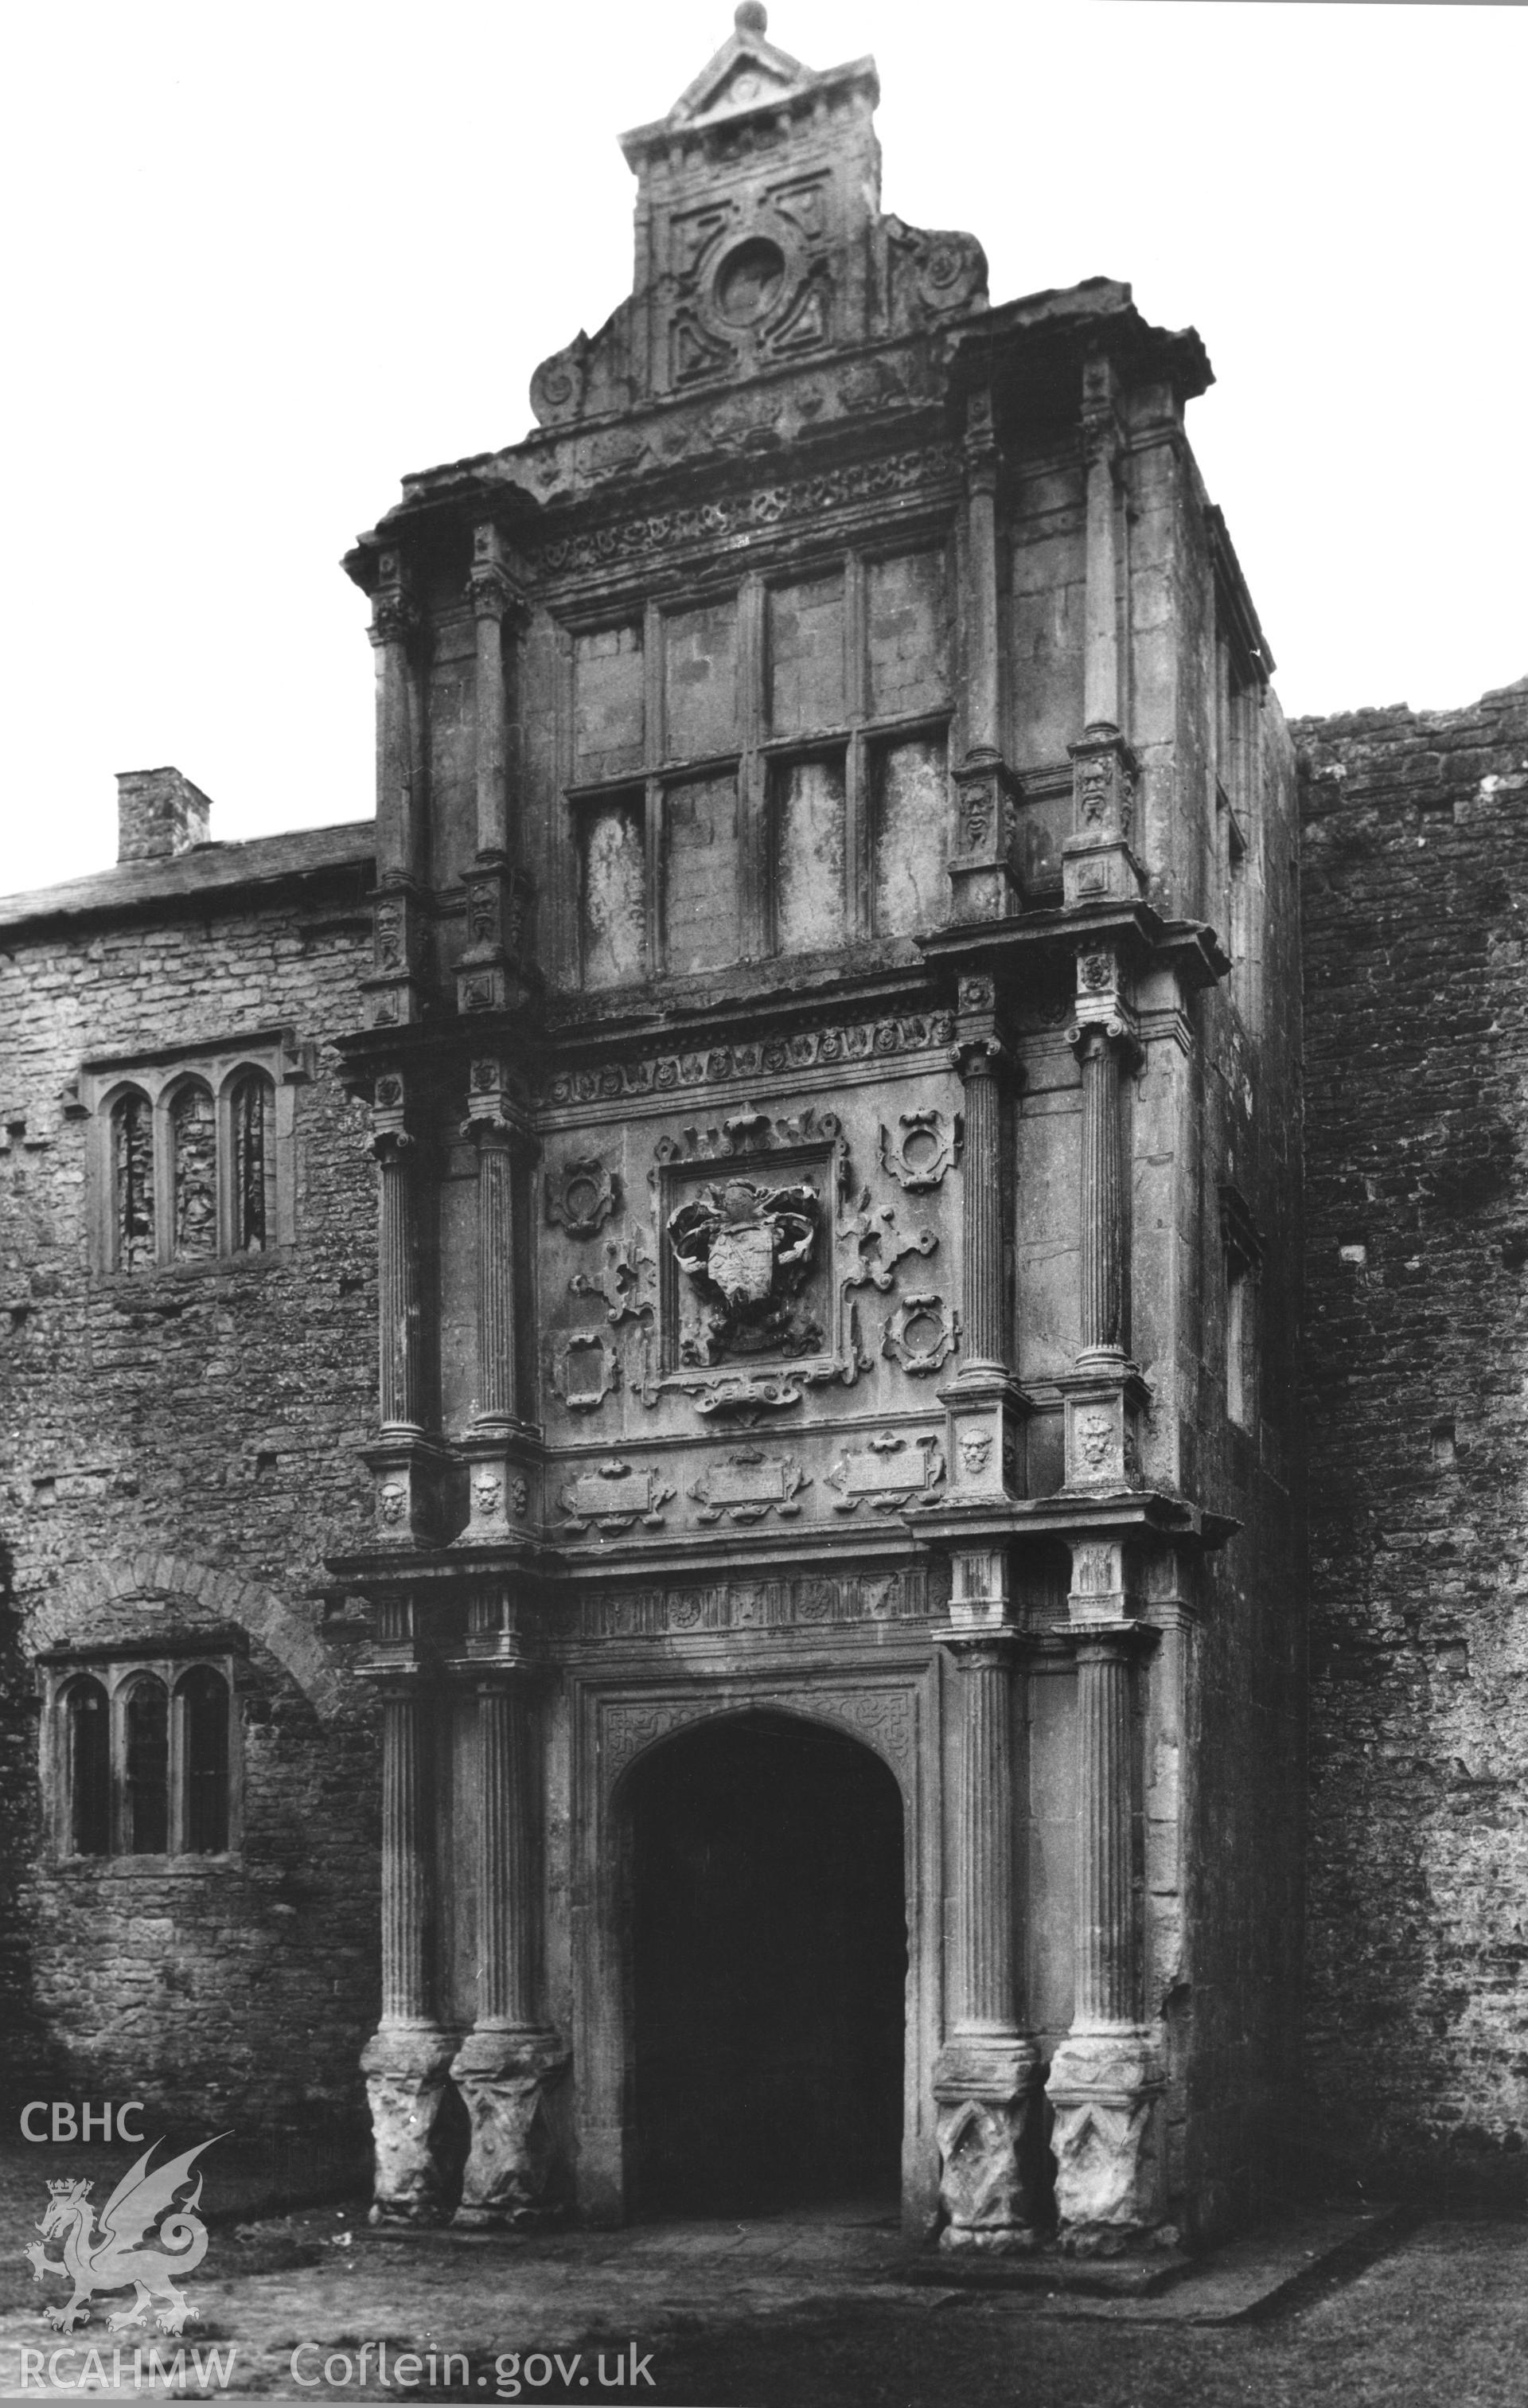 B&W photo showing view of the porch at Old Beaupre, Glamorgan, produced by Douglas Hague, undated.